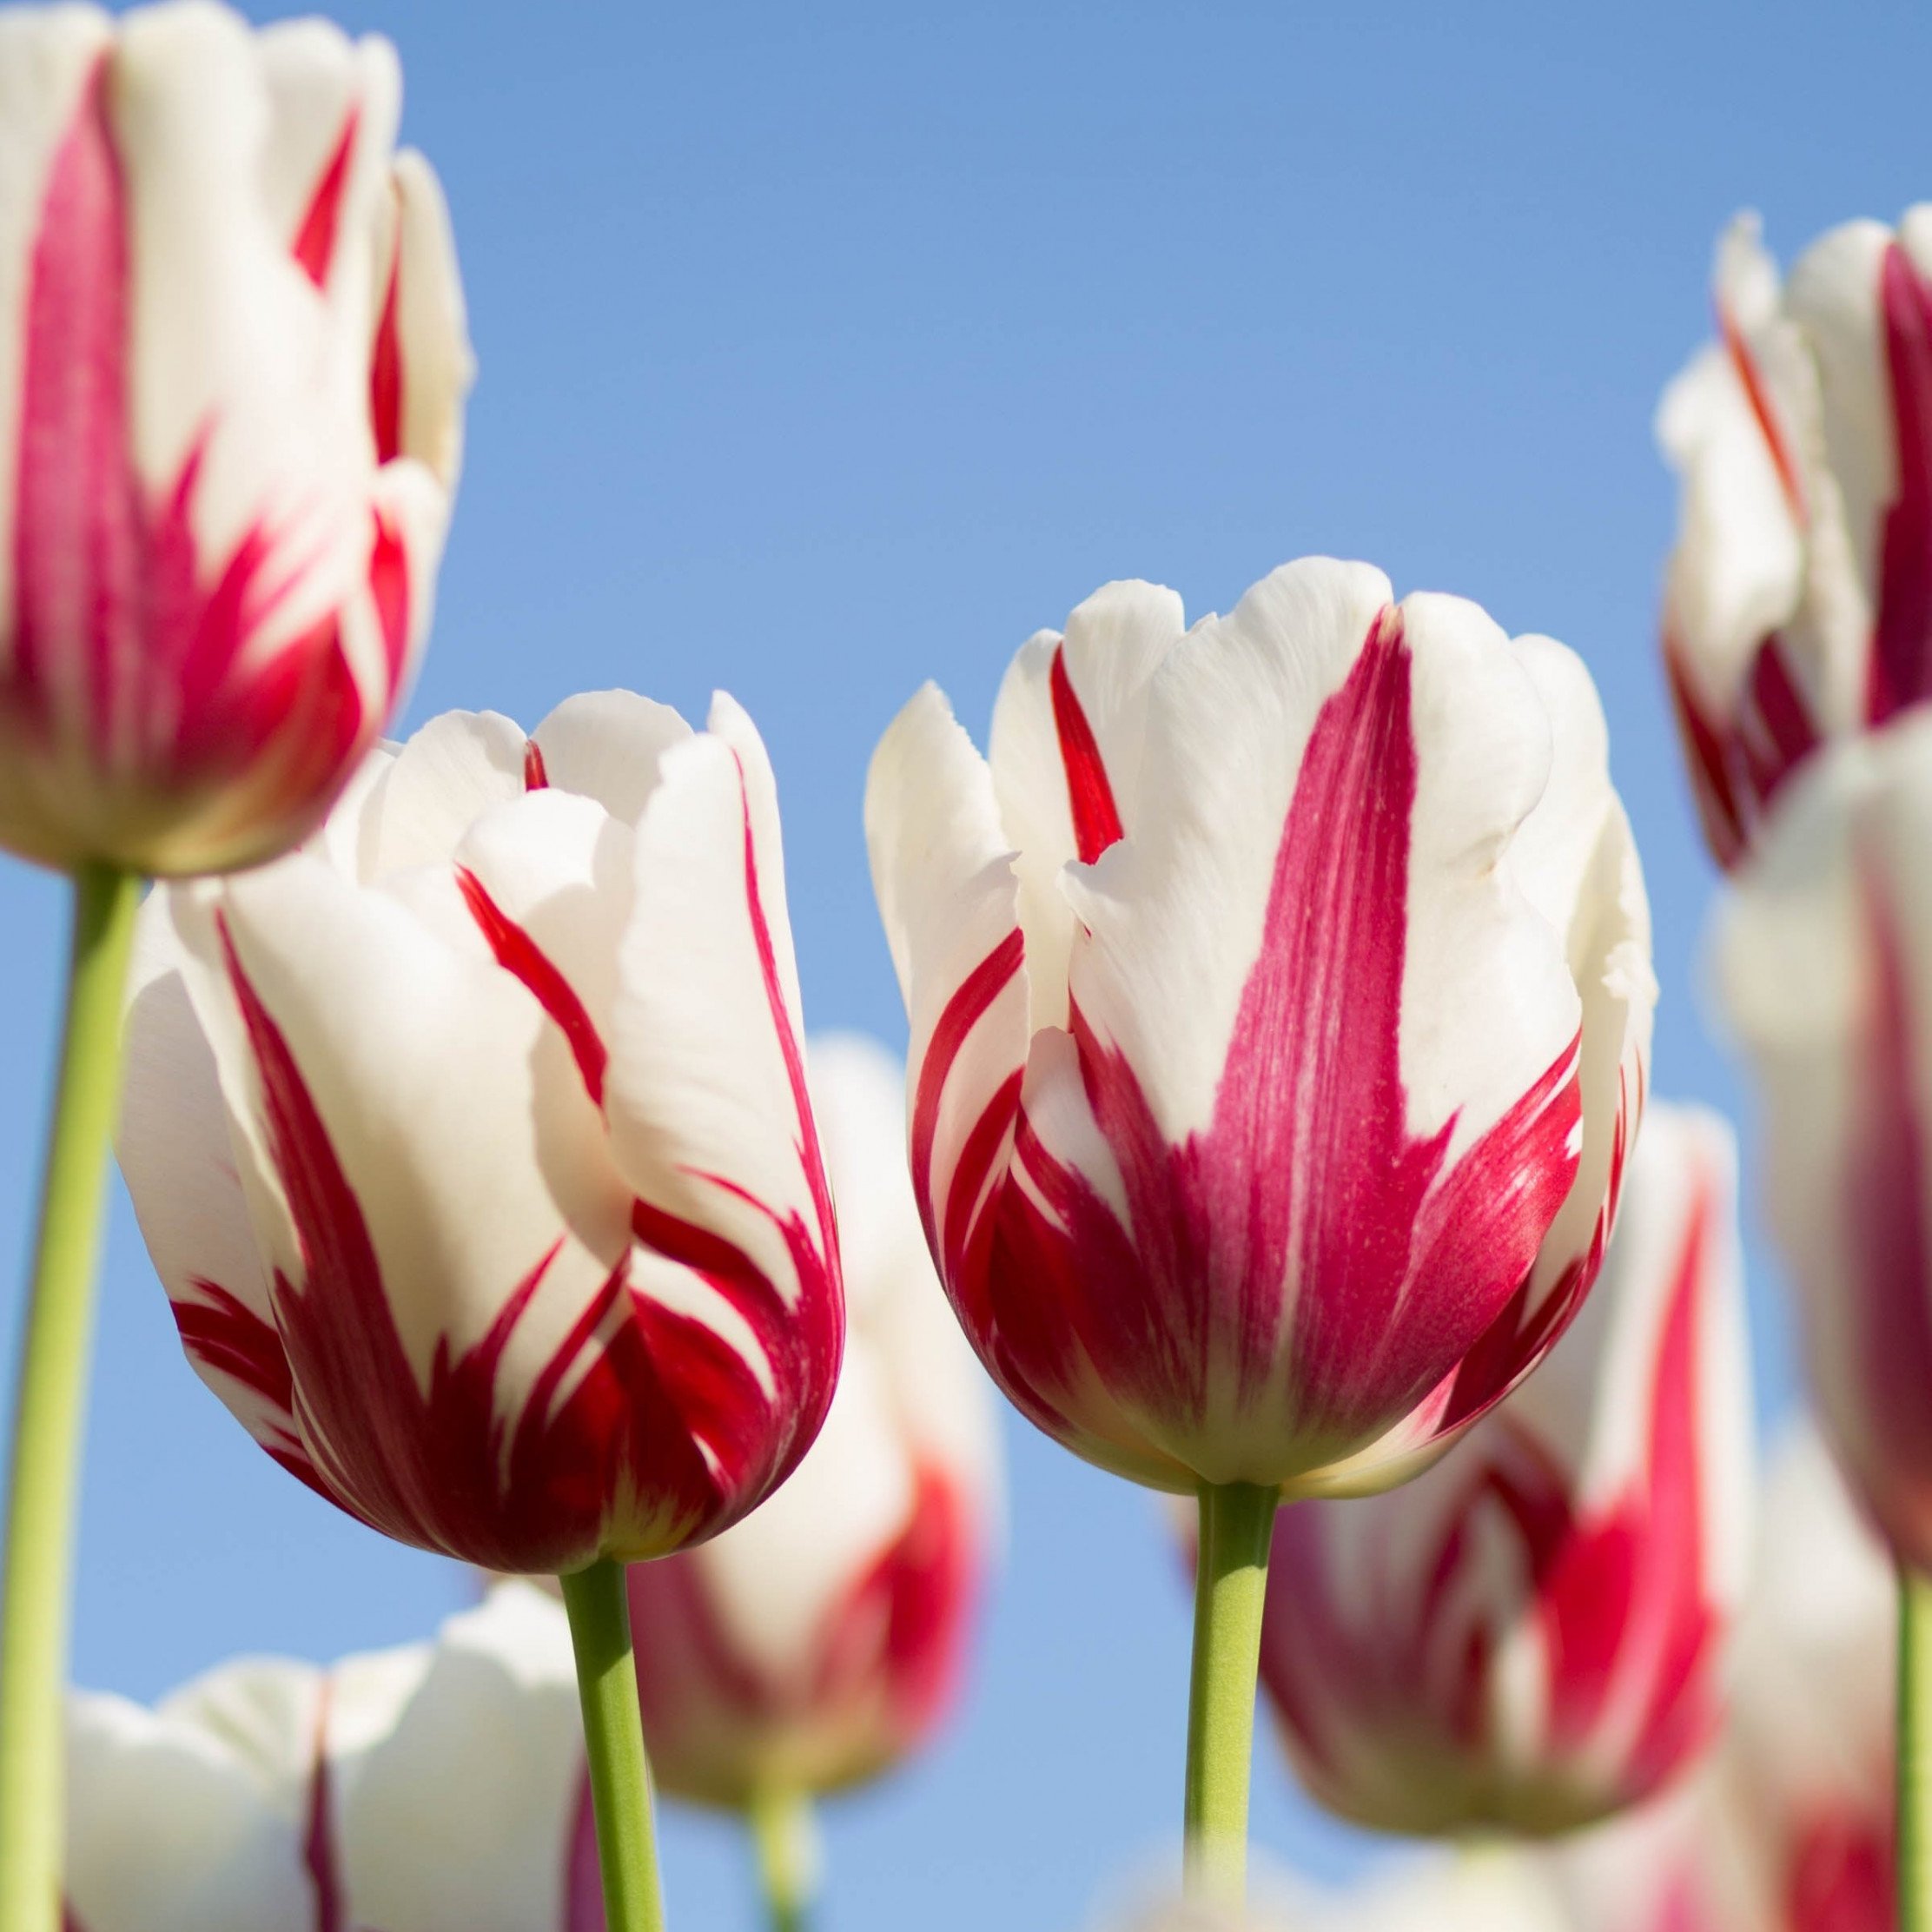 Download wallpaper: Red white tulips 2224x2224